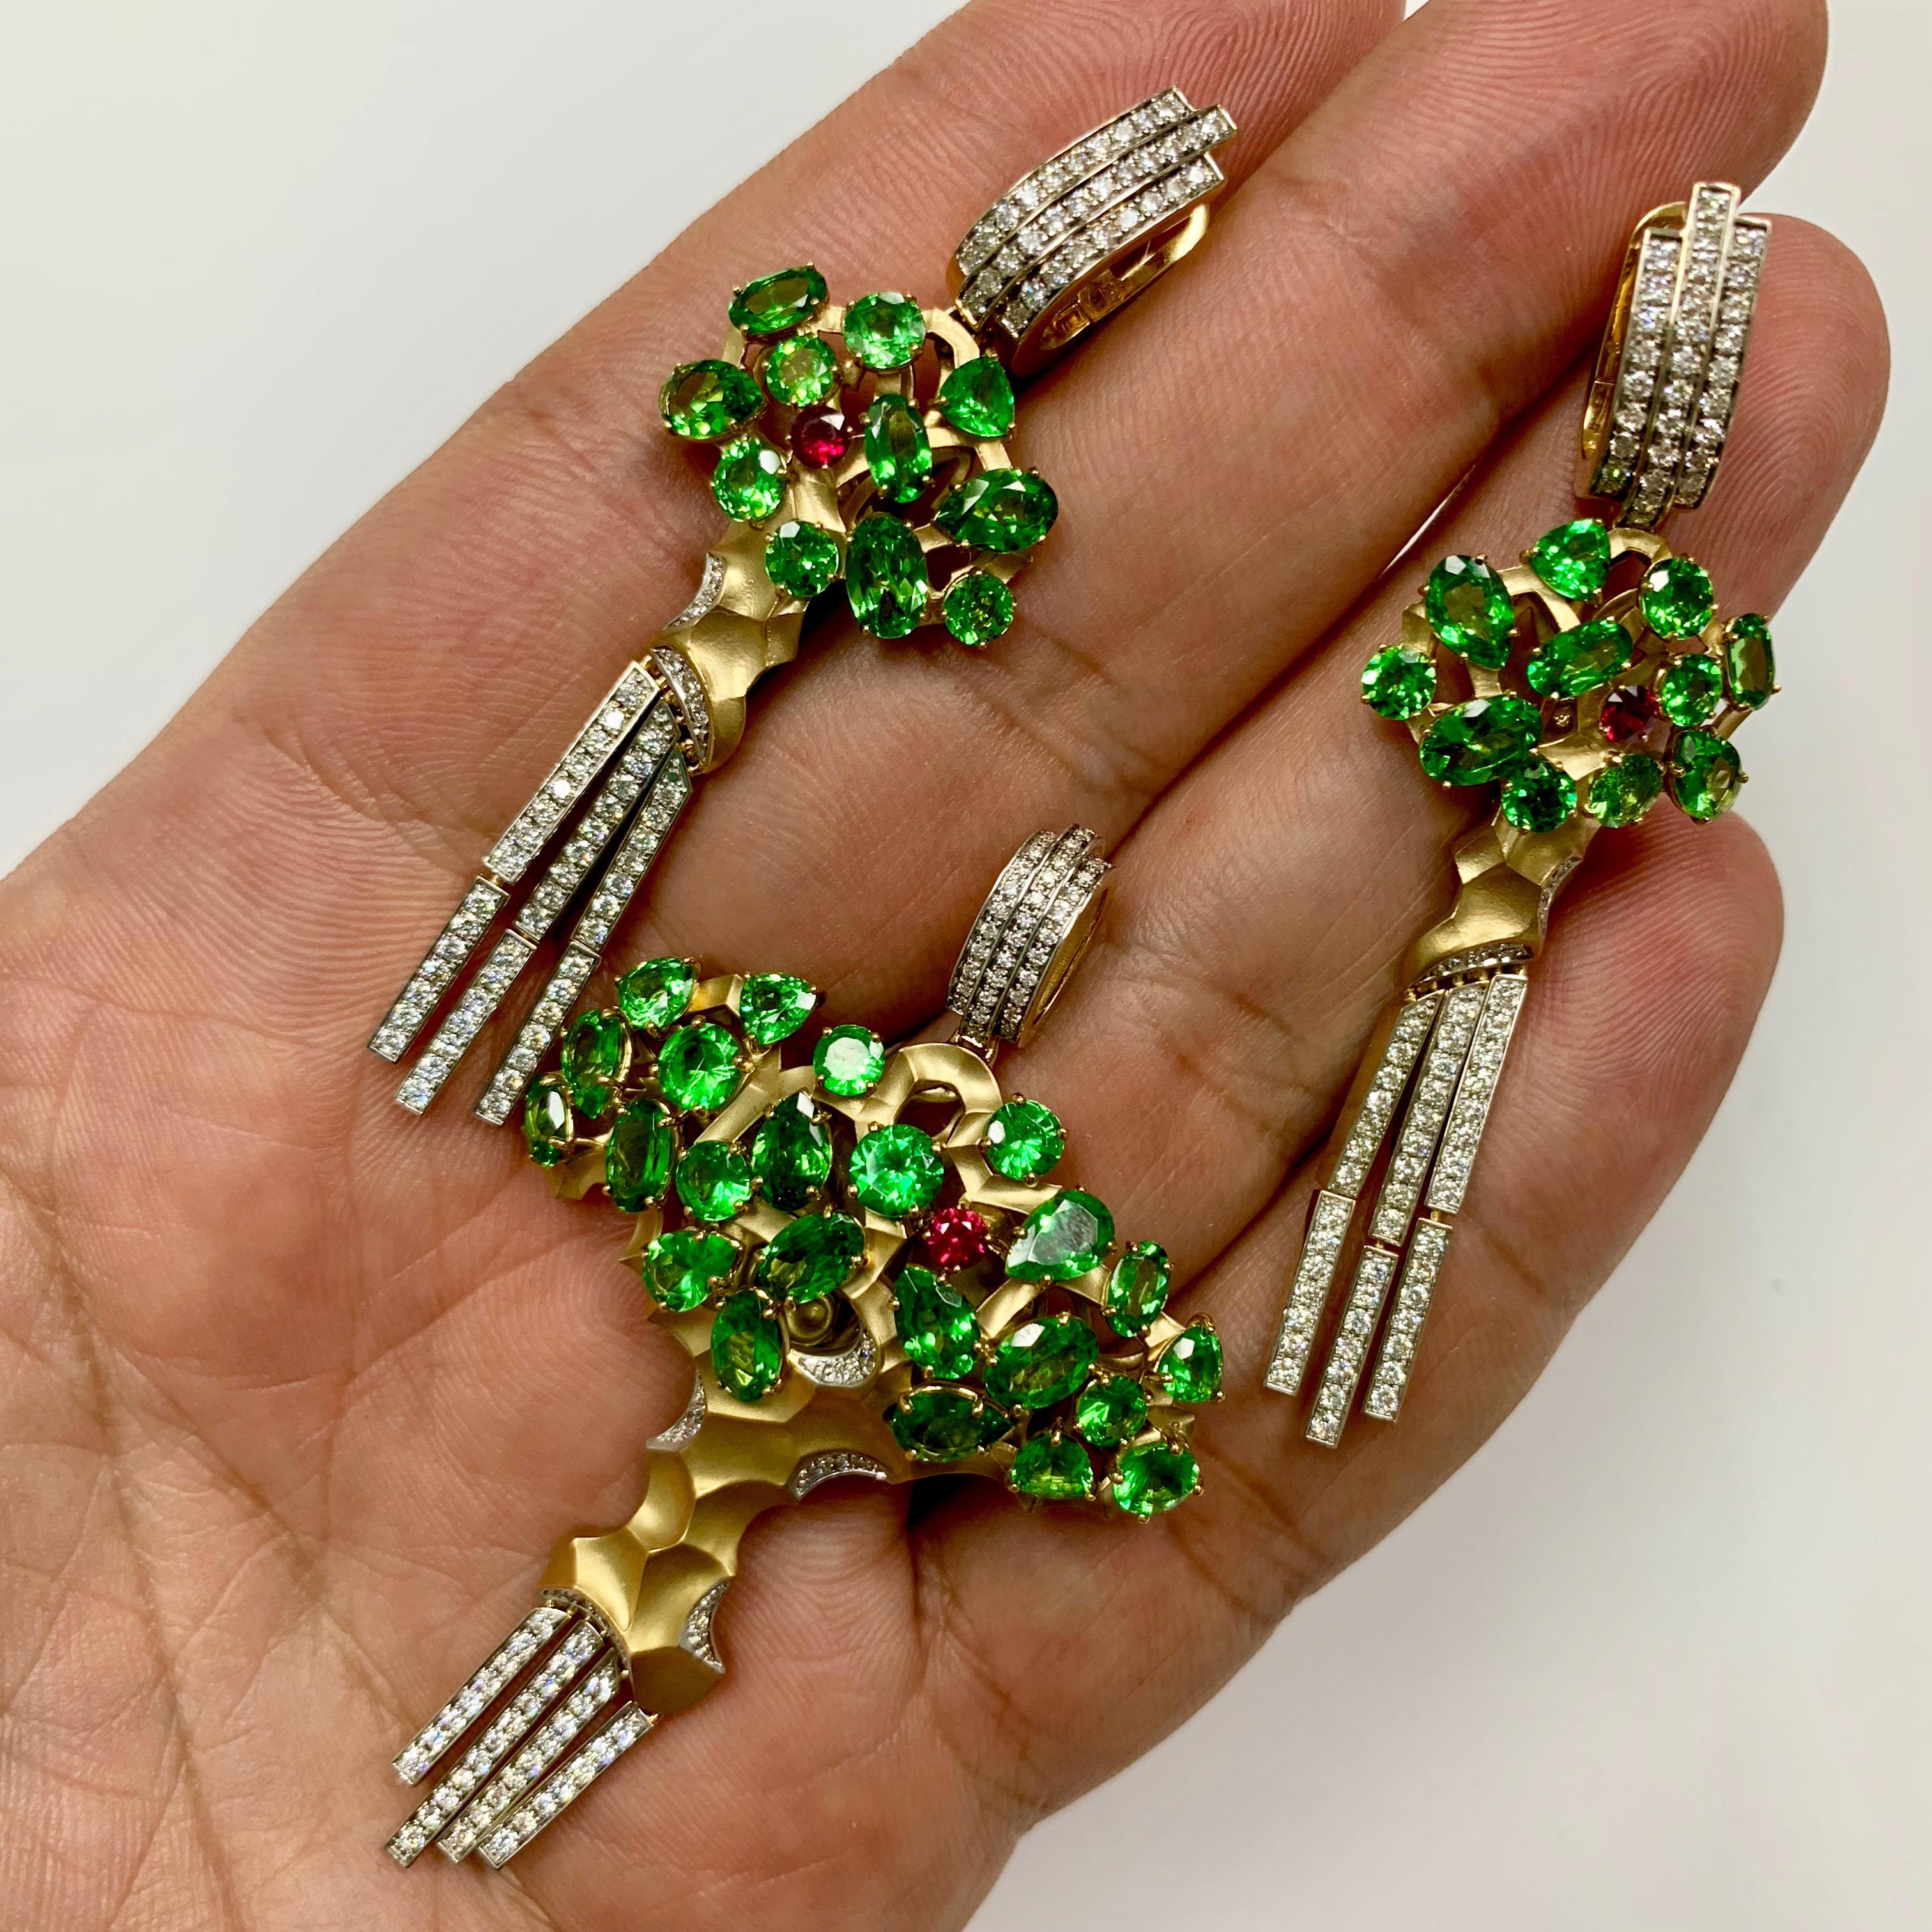 Diamond Tsavorite 18 Karat Yellow Gold Eden Tree Suite
Pendant and Earrings
Everybody knows the story about Eden Tree, the Story of Life. 
Now you also can see how It looks like. Tsavorites as the leafs, Ruby as the Apple and Diamonds Symbolised the